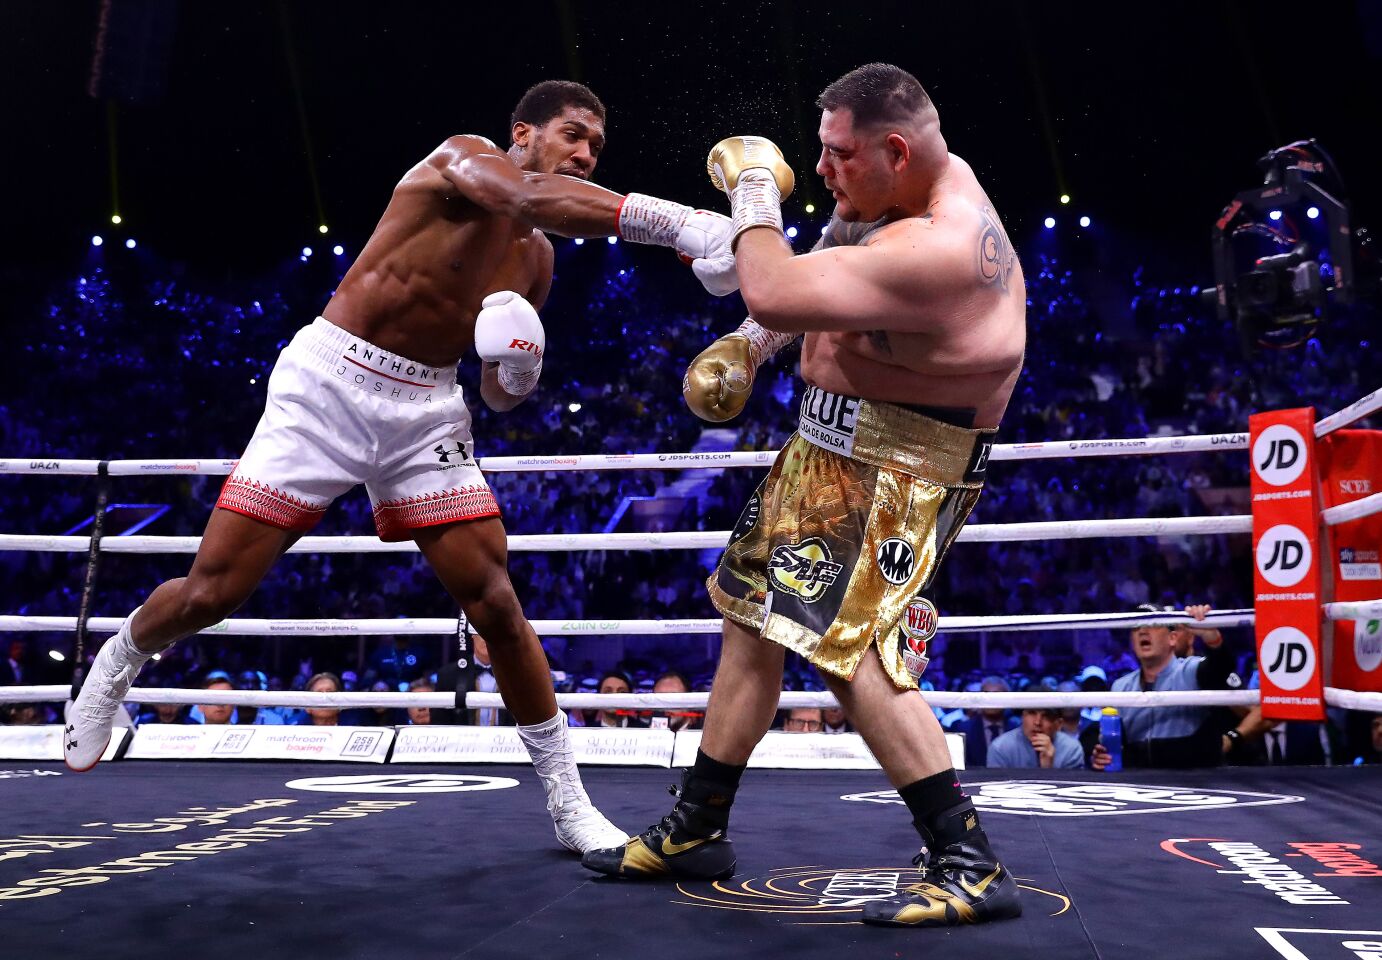 Anthony Joshua hits Andy Ruiz Jr. with a right hand during their heavyweight title fight on Dec. 7 in Diriyah, Saudi Arabia.